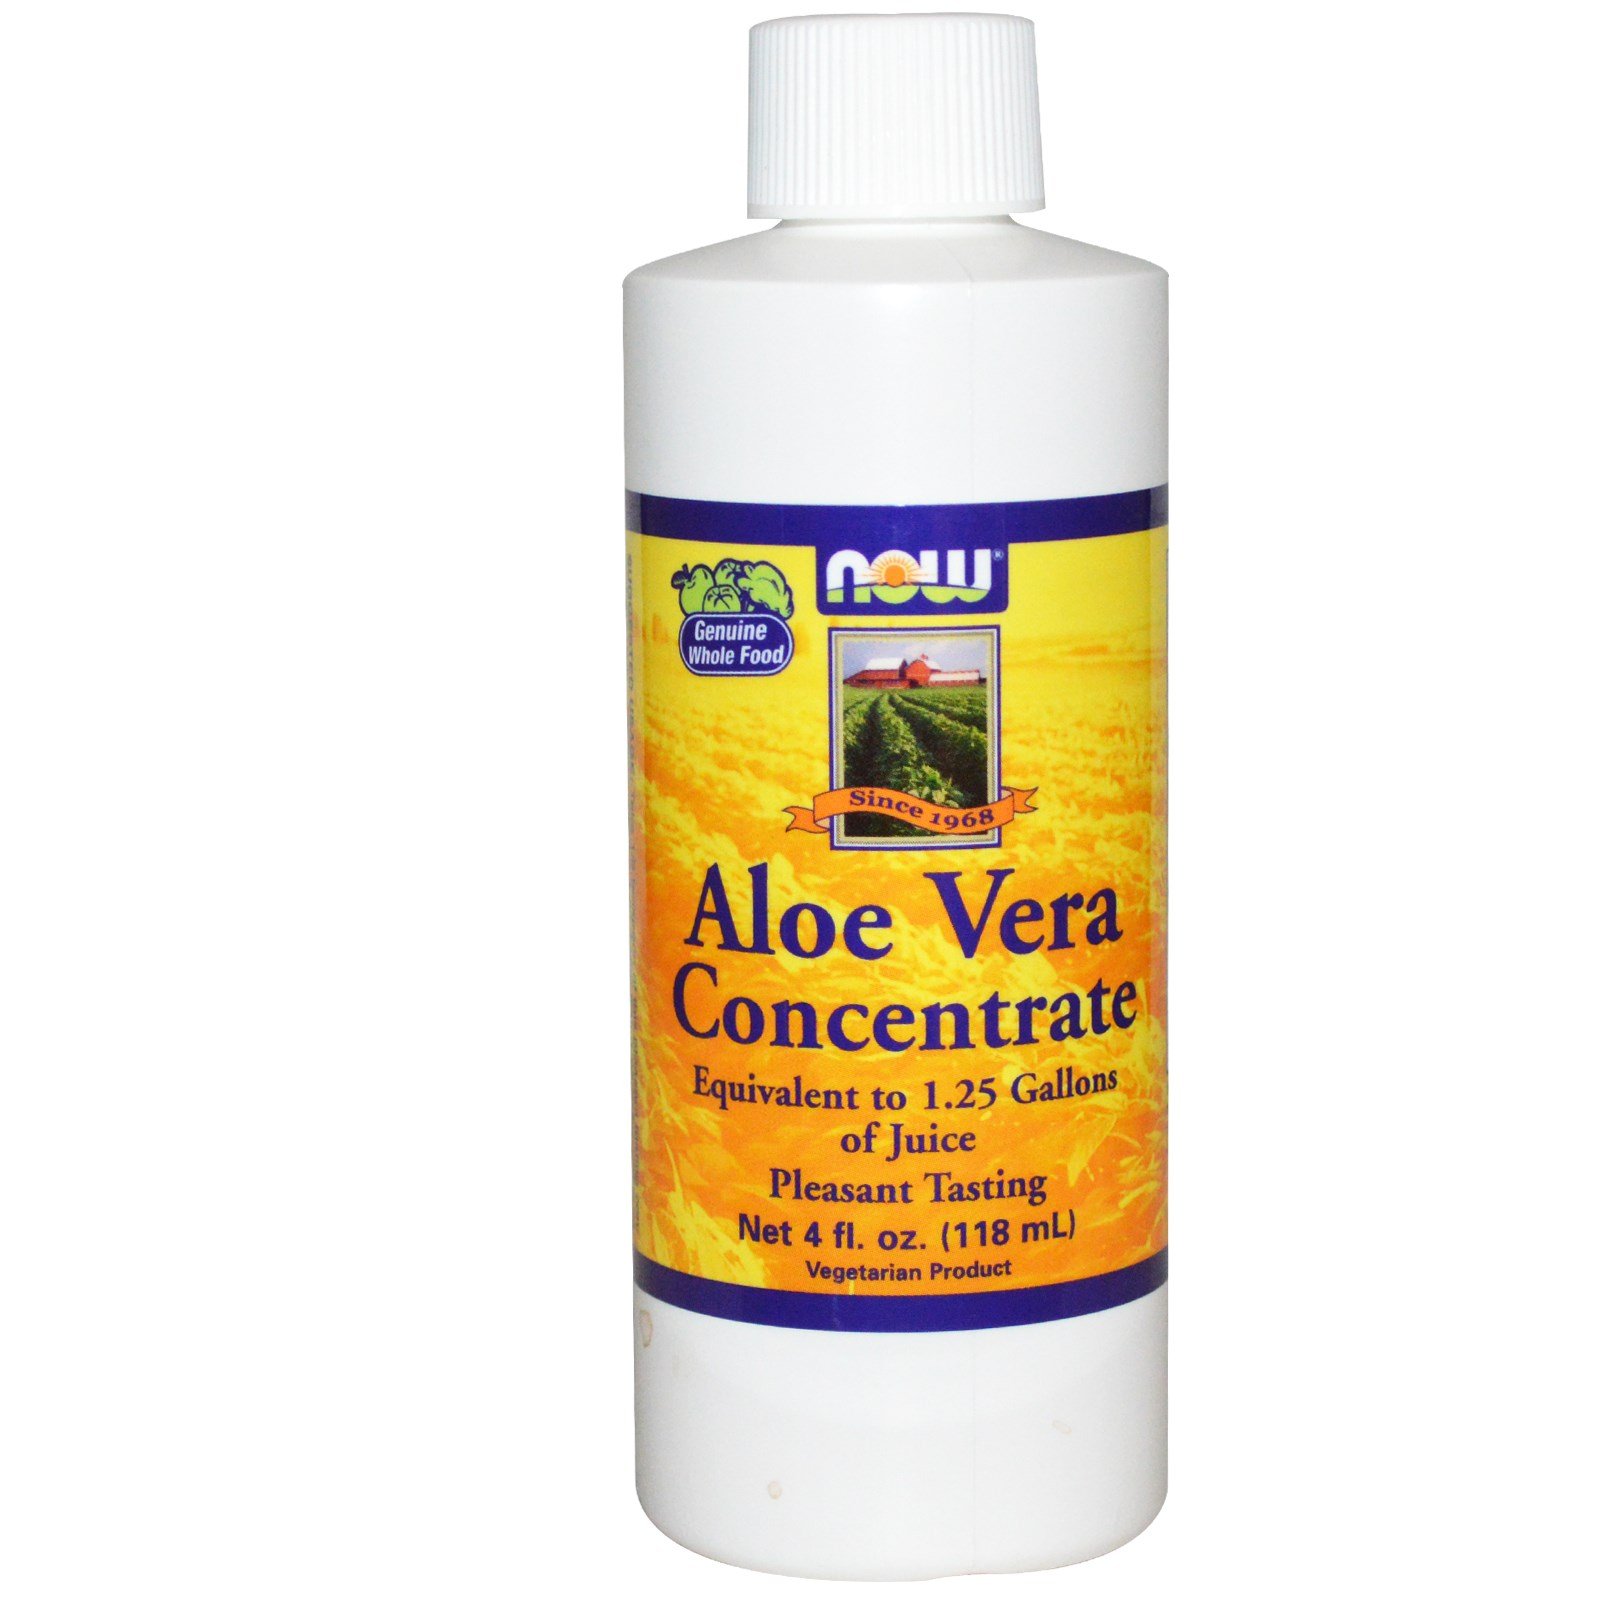 Aloe Vera Concentrate, 118 мл, Now. Спец препараты. 